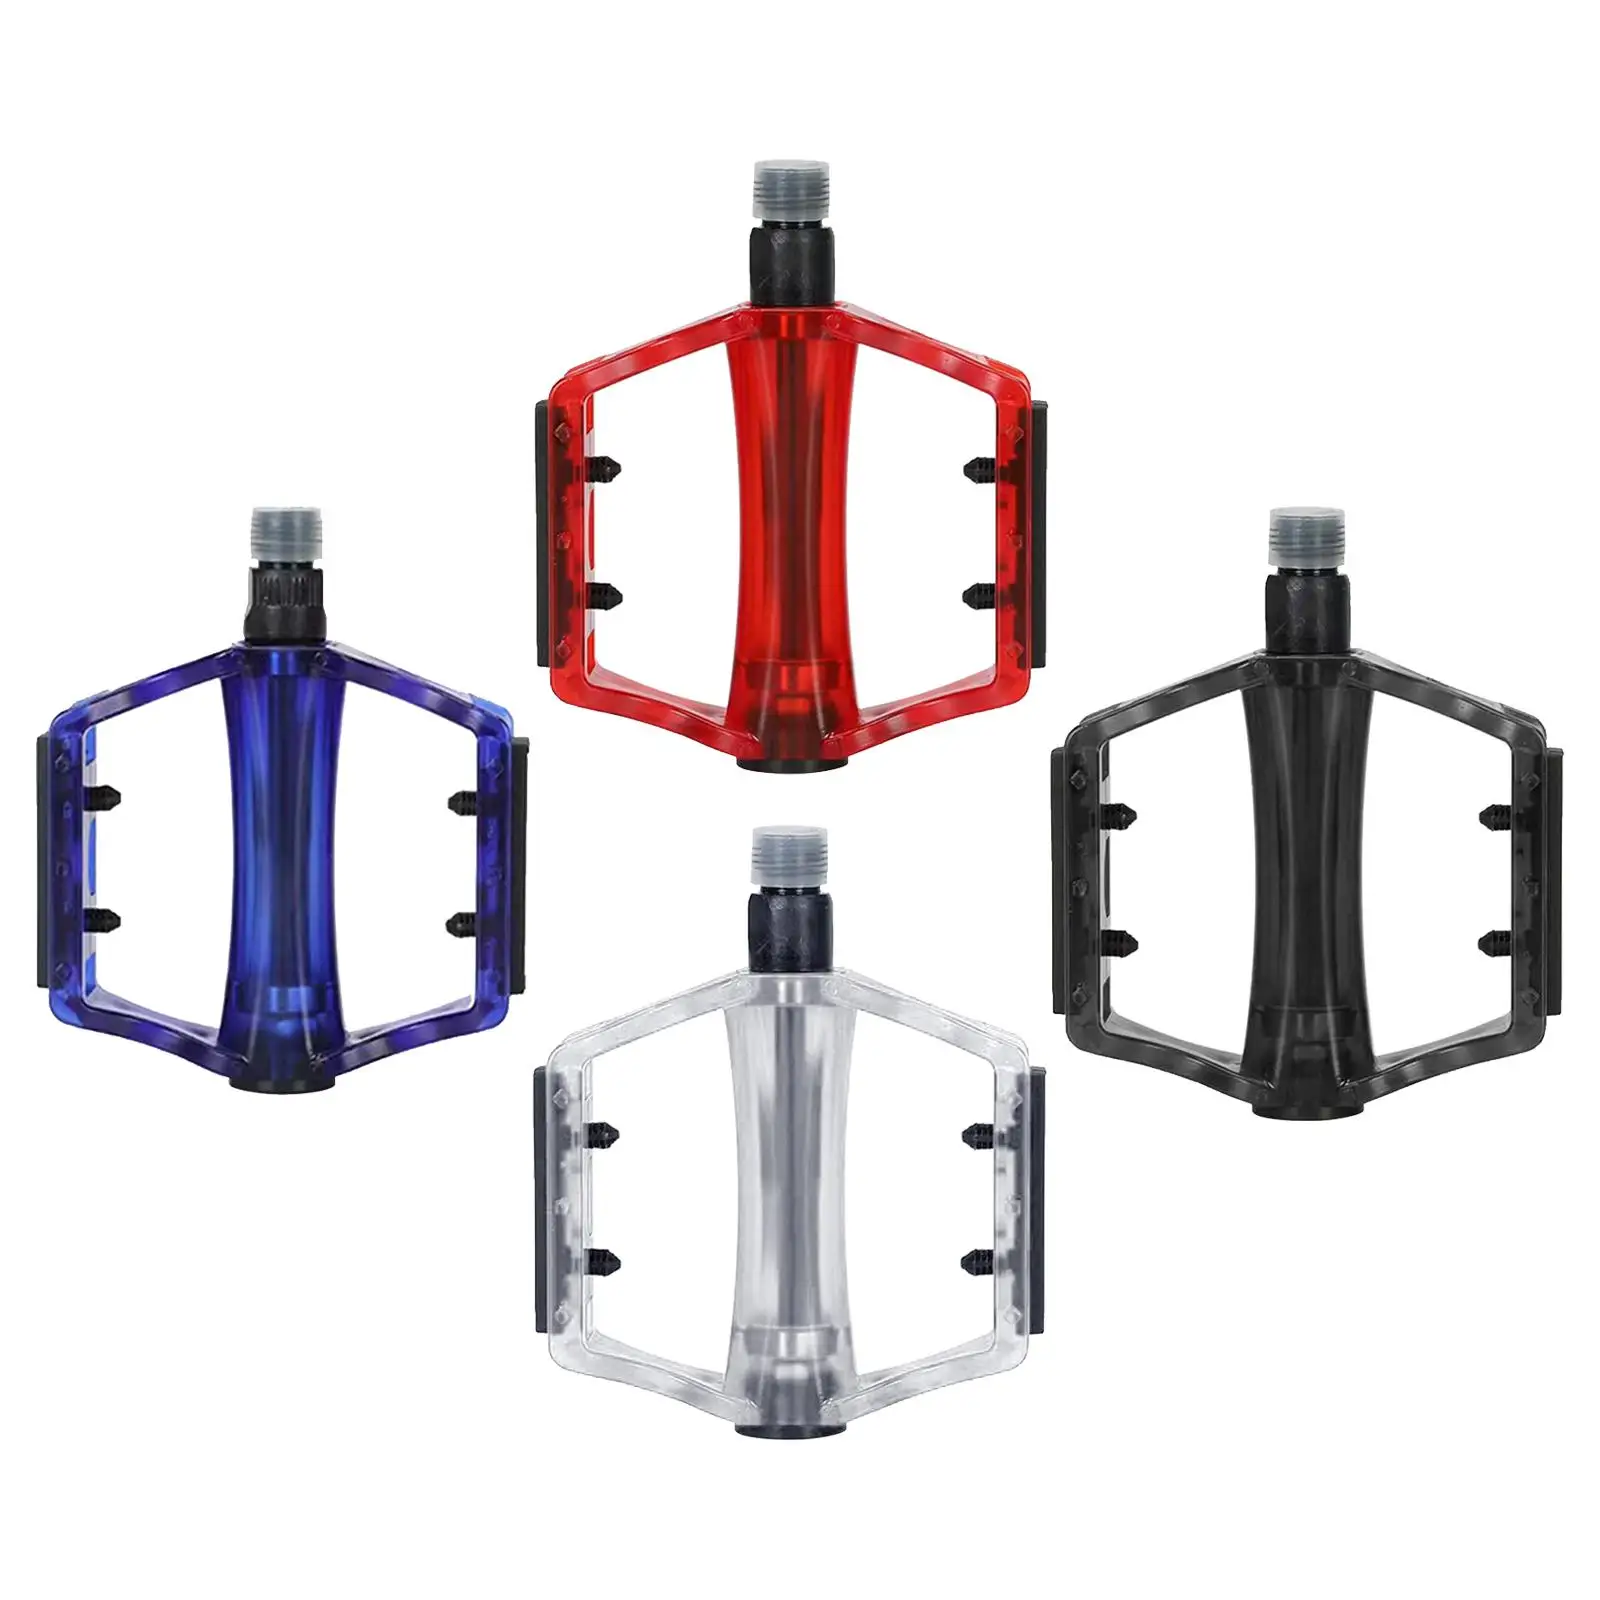 2x Bike Pedals Bicycle Pedals Durable Lightweight Cycling Pedals Parts for Folding Bike Adult Bikes Mountain Bike Replacement